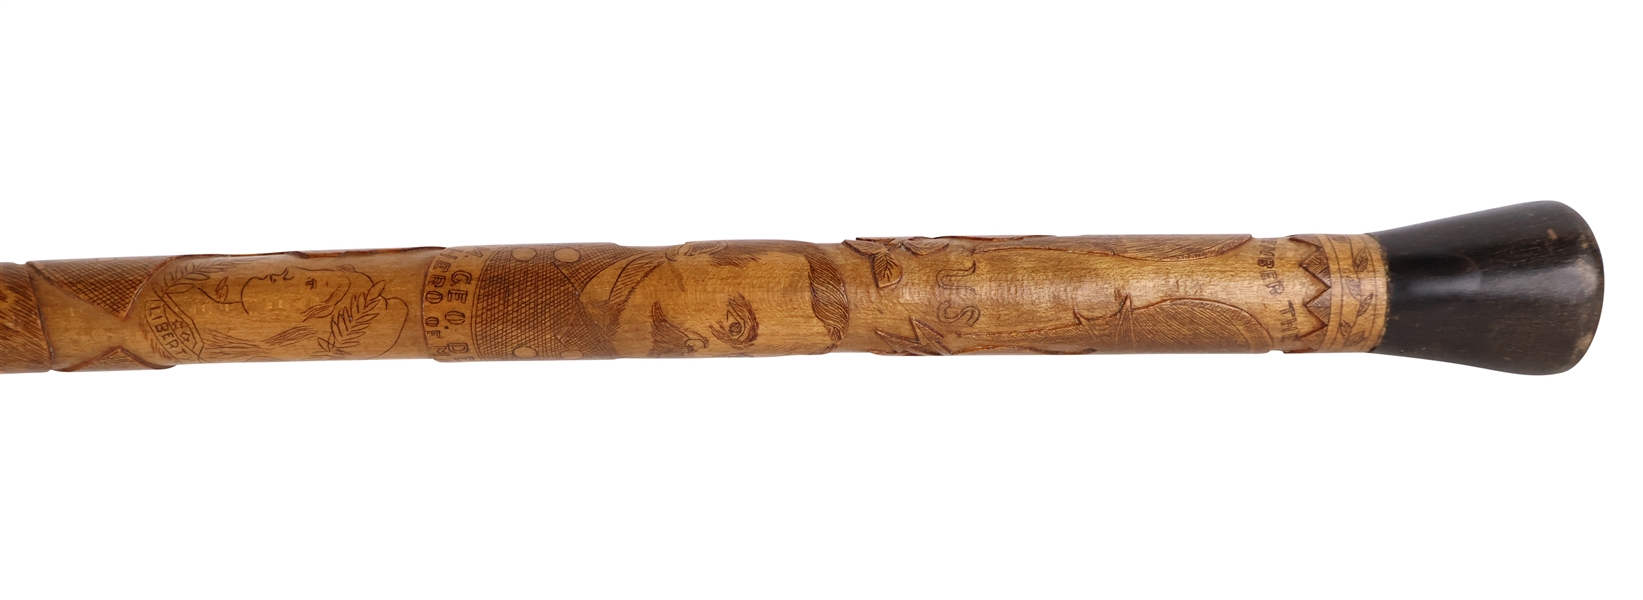 Spanish-American War Cane Carved with Eagle